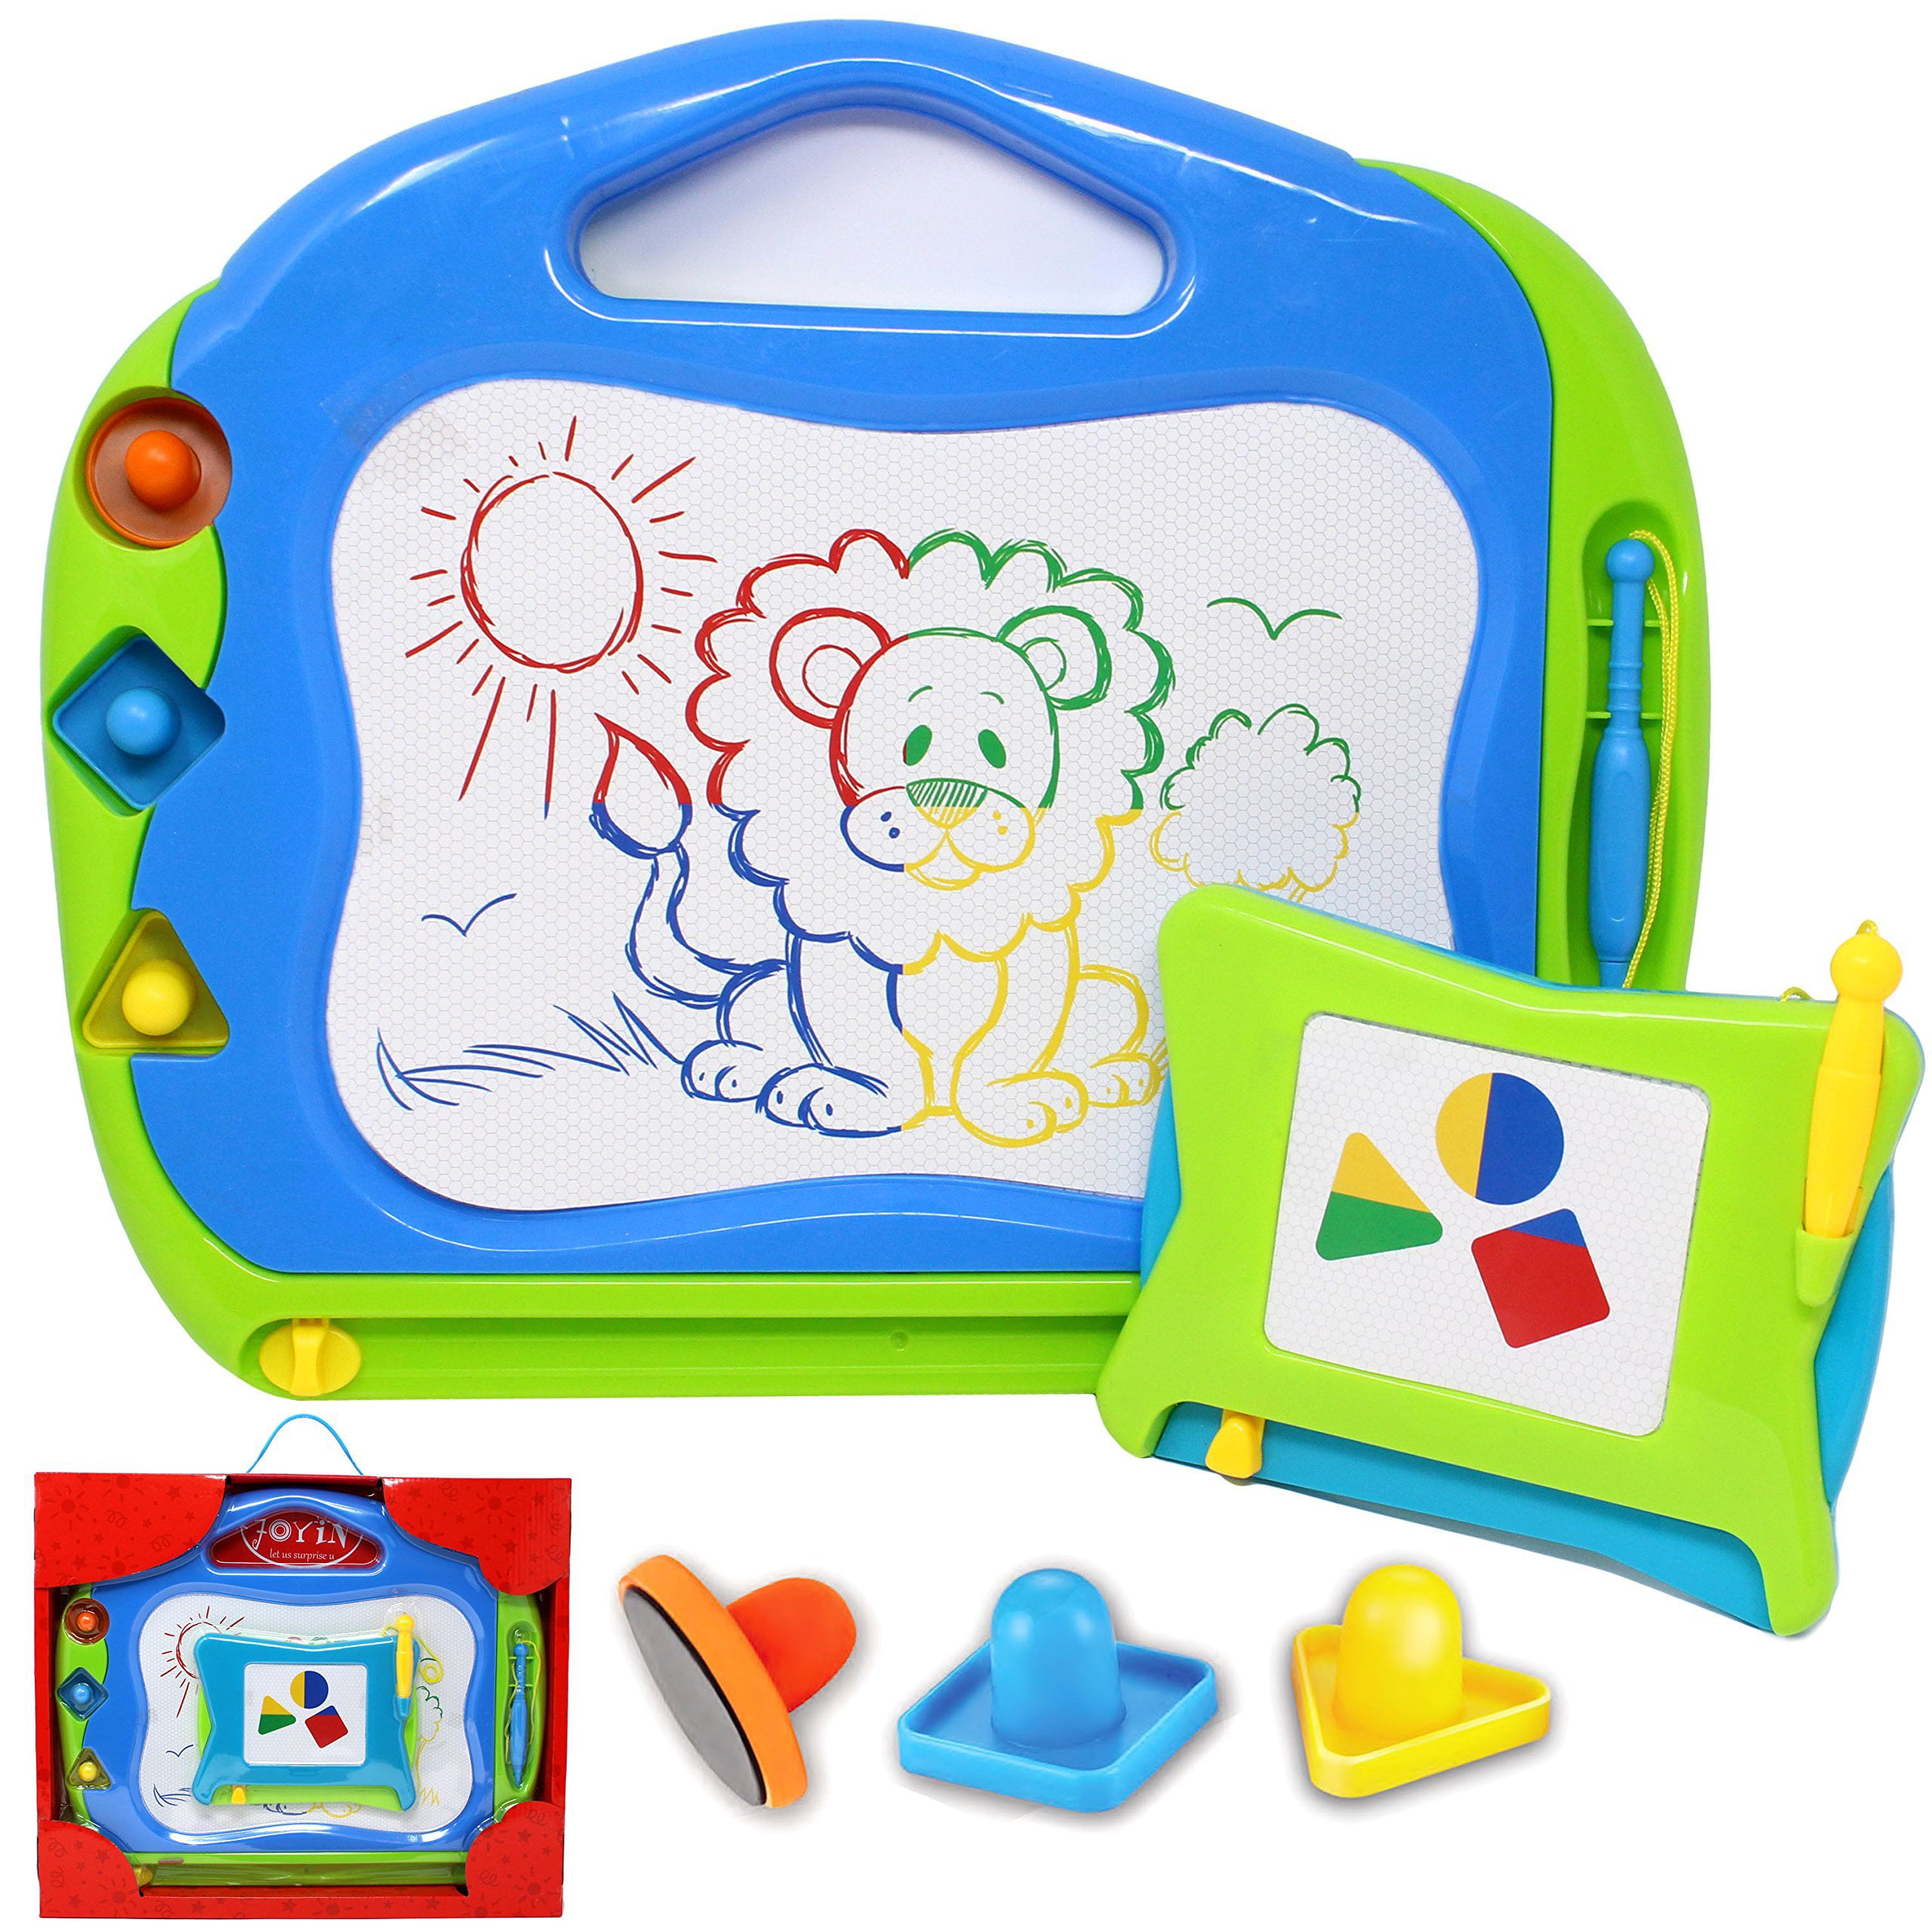 Magnetic Drawing Board For Toddlers Extra LARGE 13 X 17" Magna Doodles Kids BLUE 